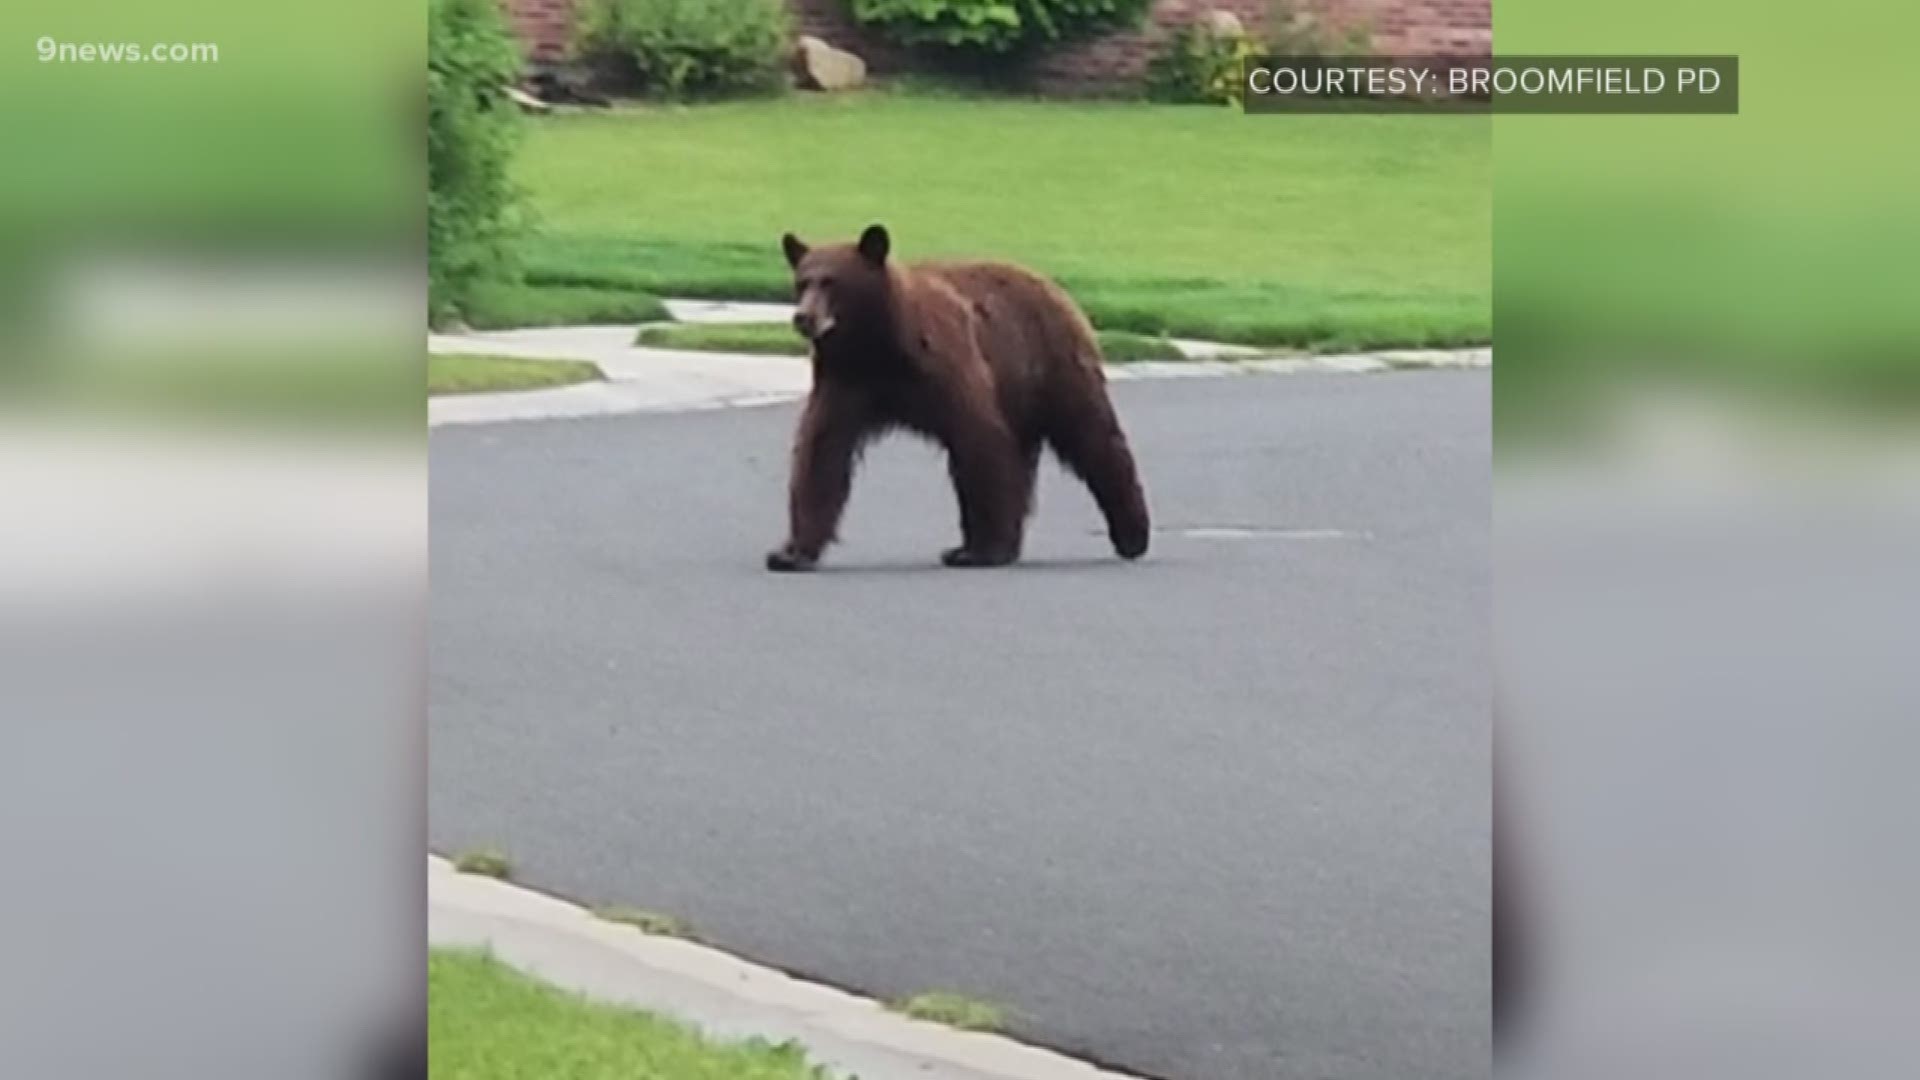 The bear was spotted multiple times wandering around a Broomfield neighborhood on Monday.